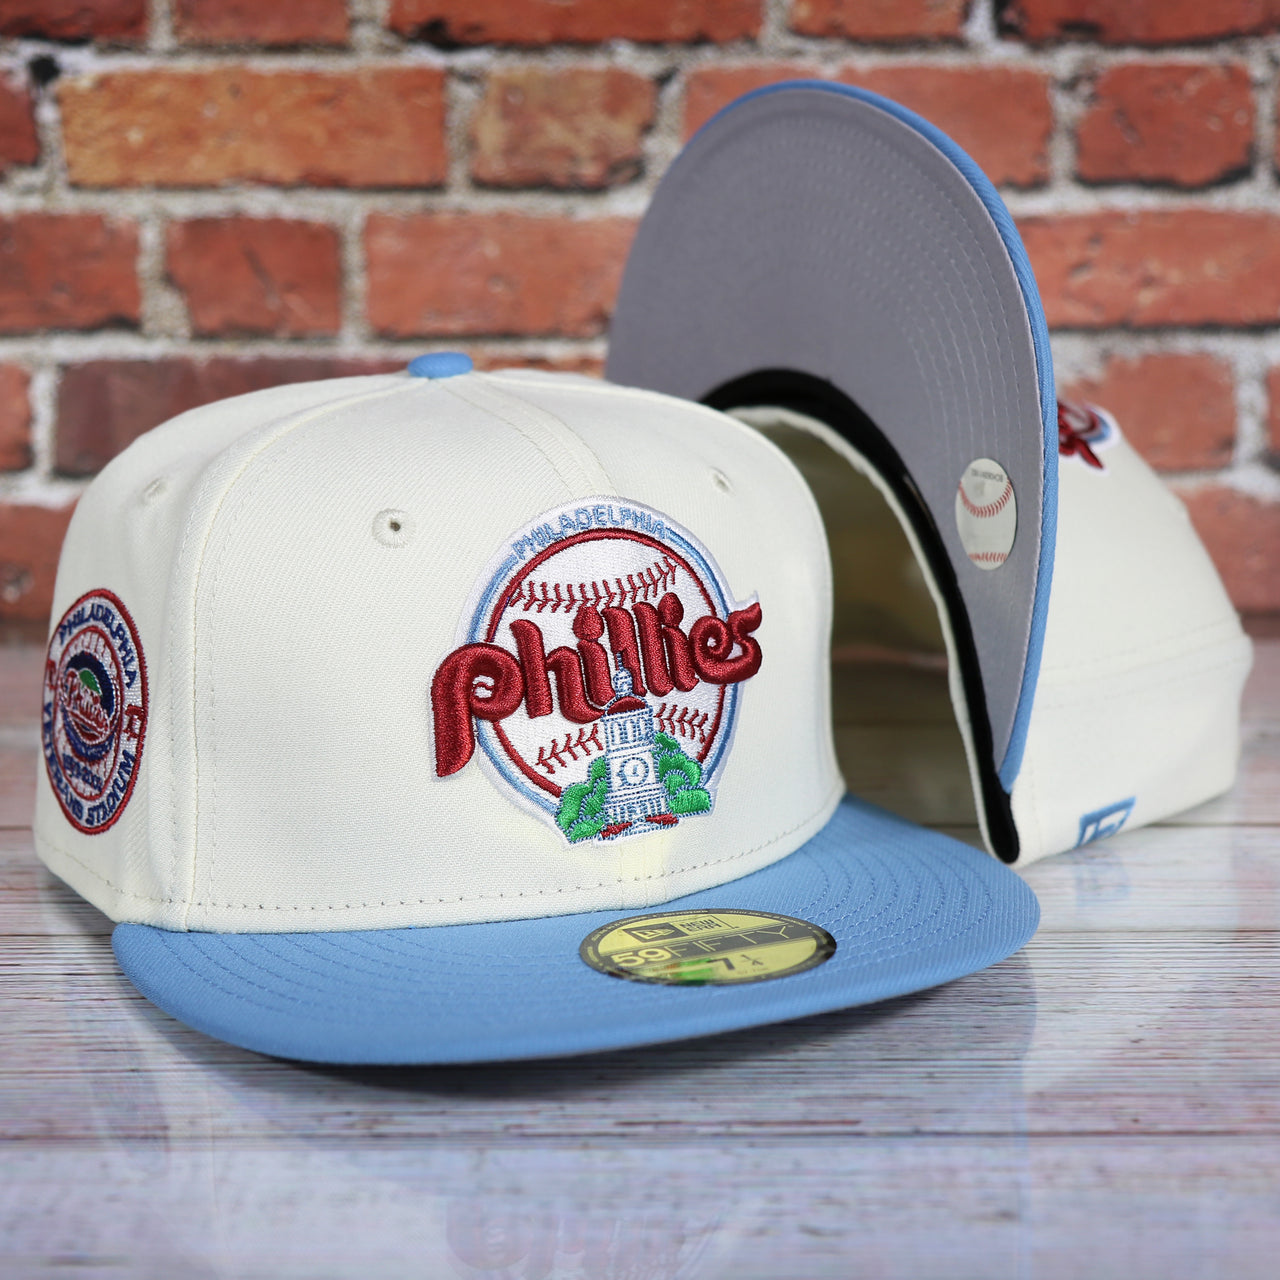 Philadelphia Phillies Cooperstown City Hall Logo Veterans Stadium Side Patch Grey UV 59Fifty Fitted Cap | Chrome/Powder Blue Cap Swag Exclusive